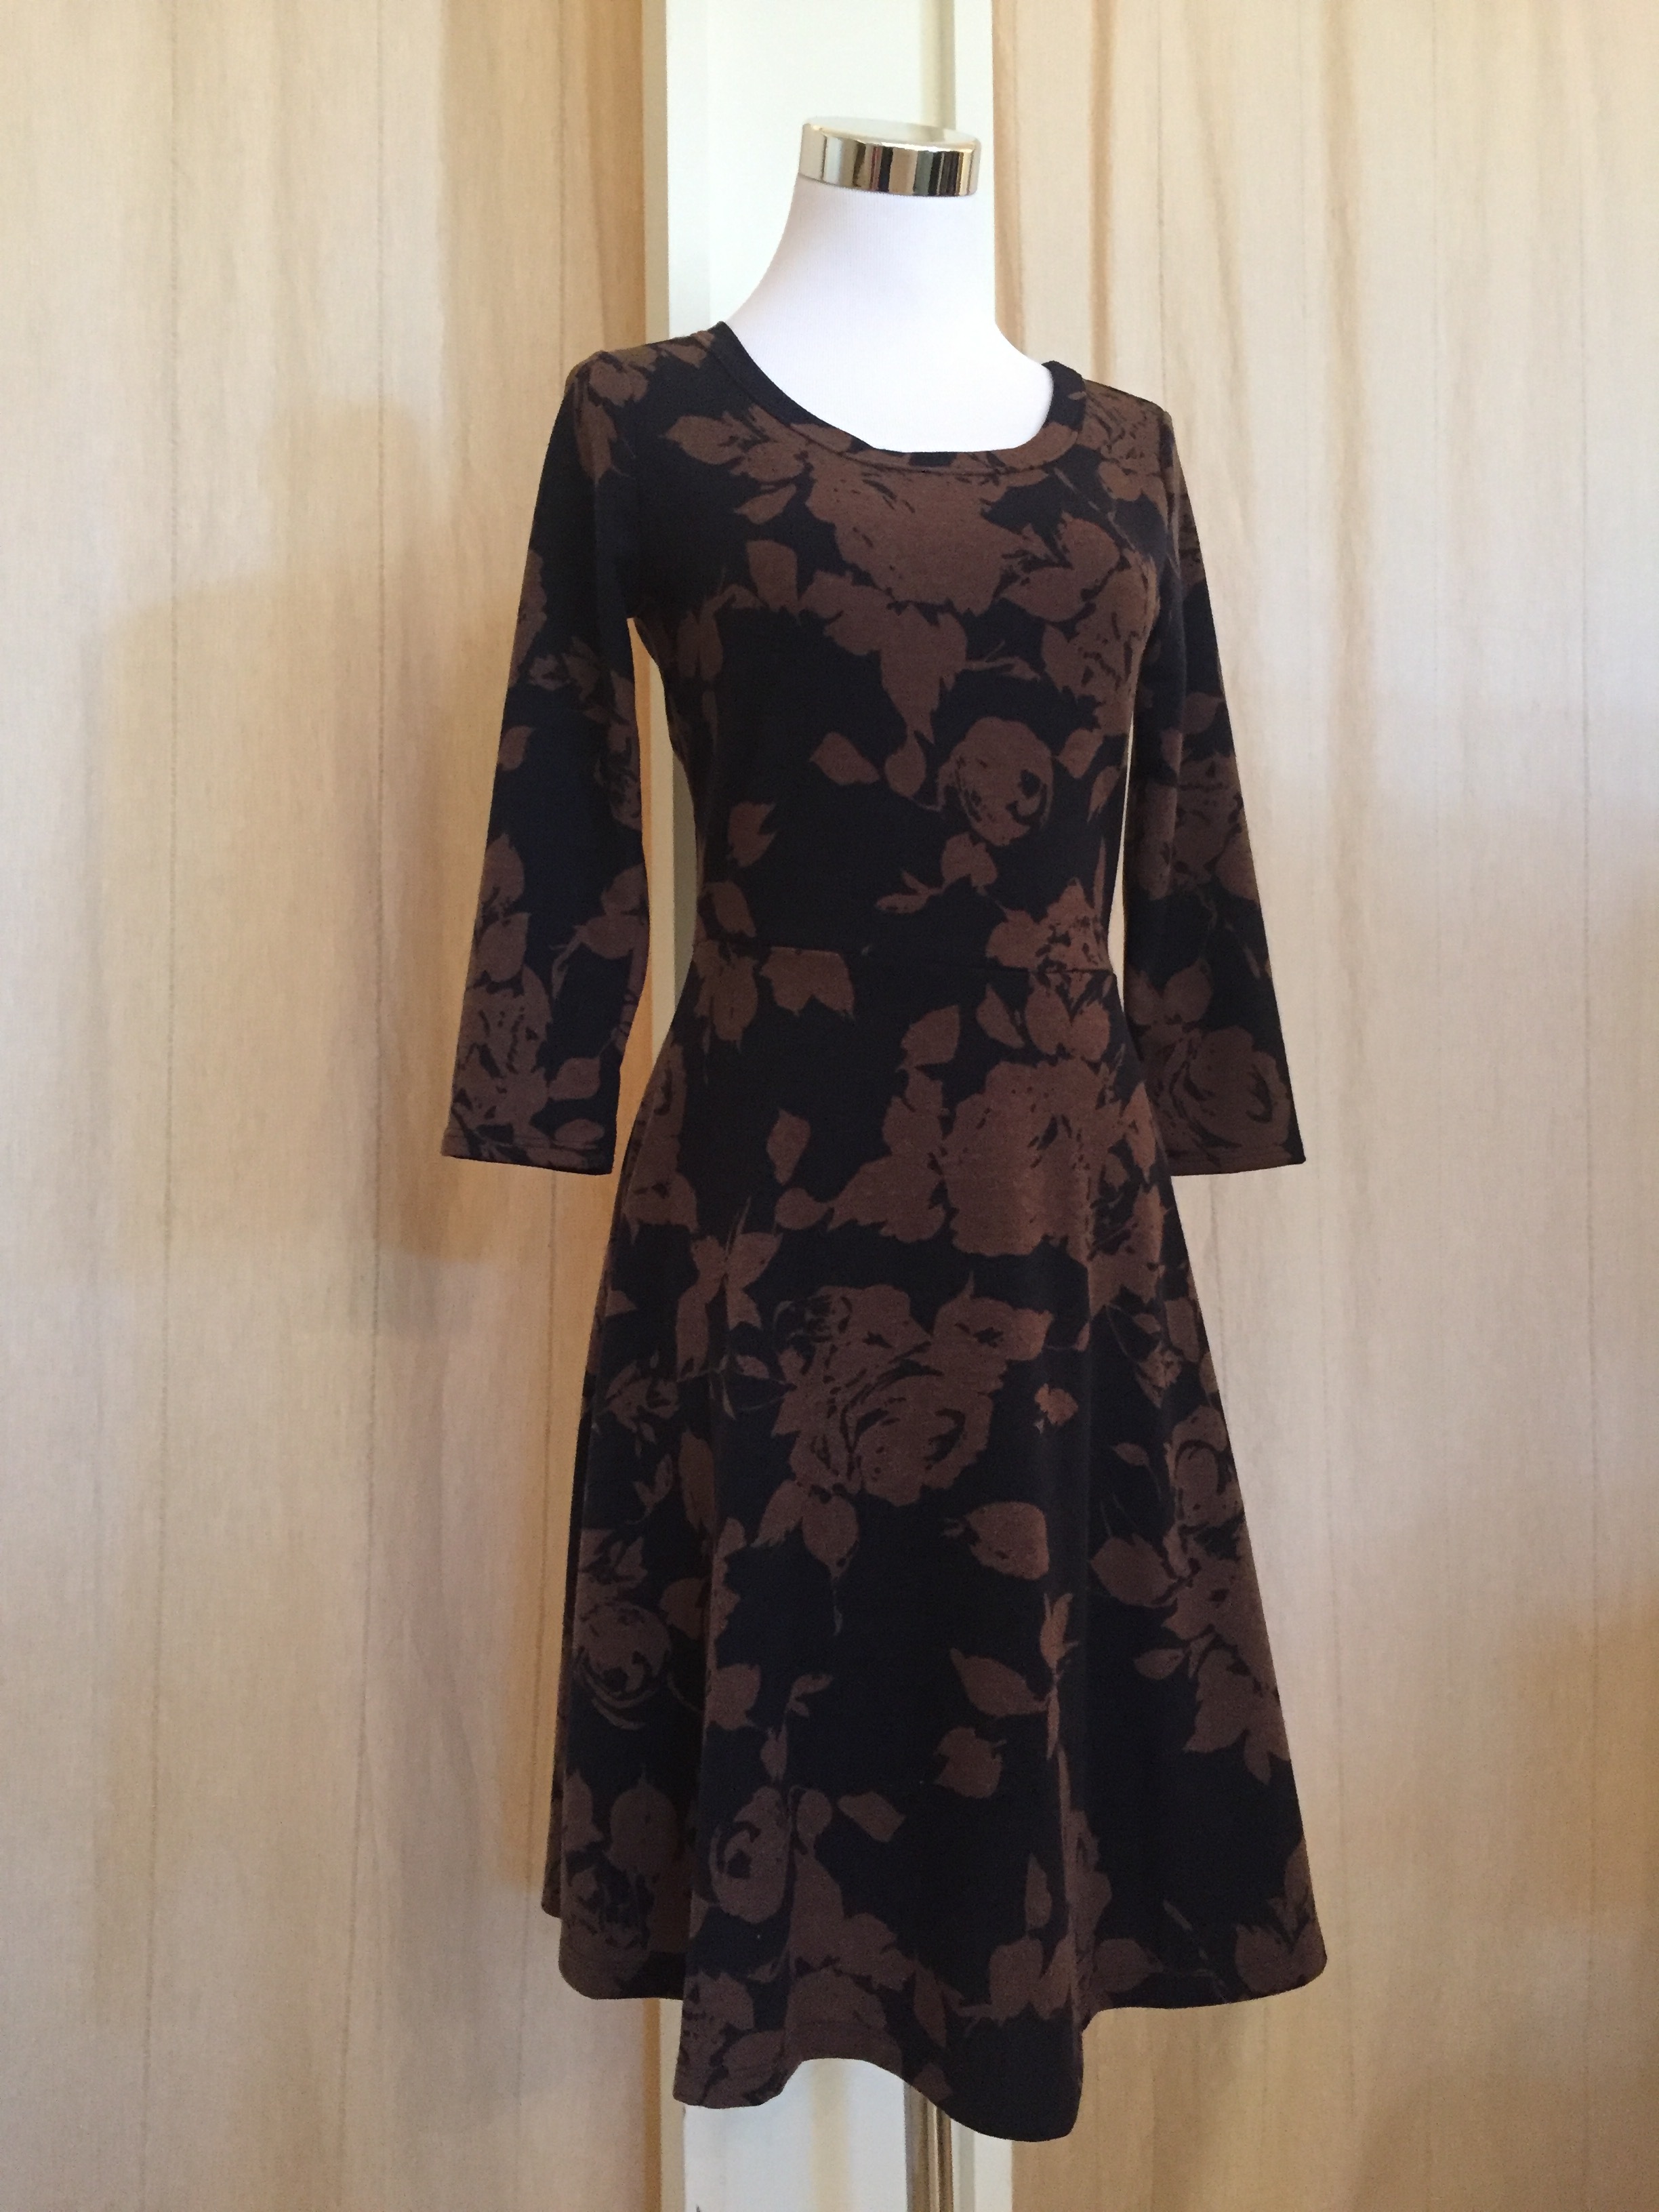 Black and brown floral dress $45